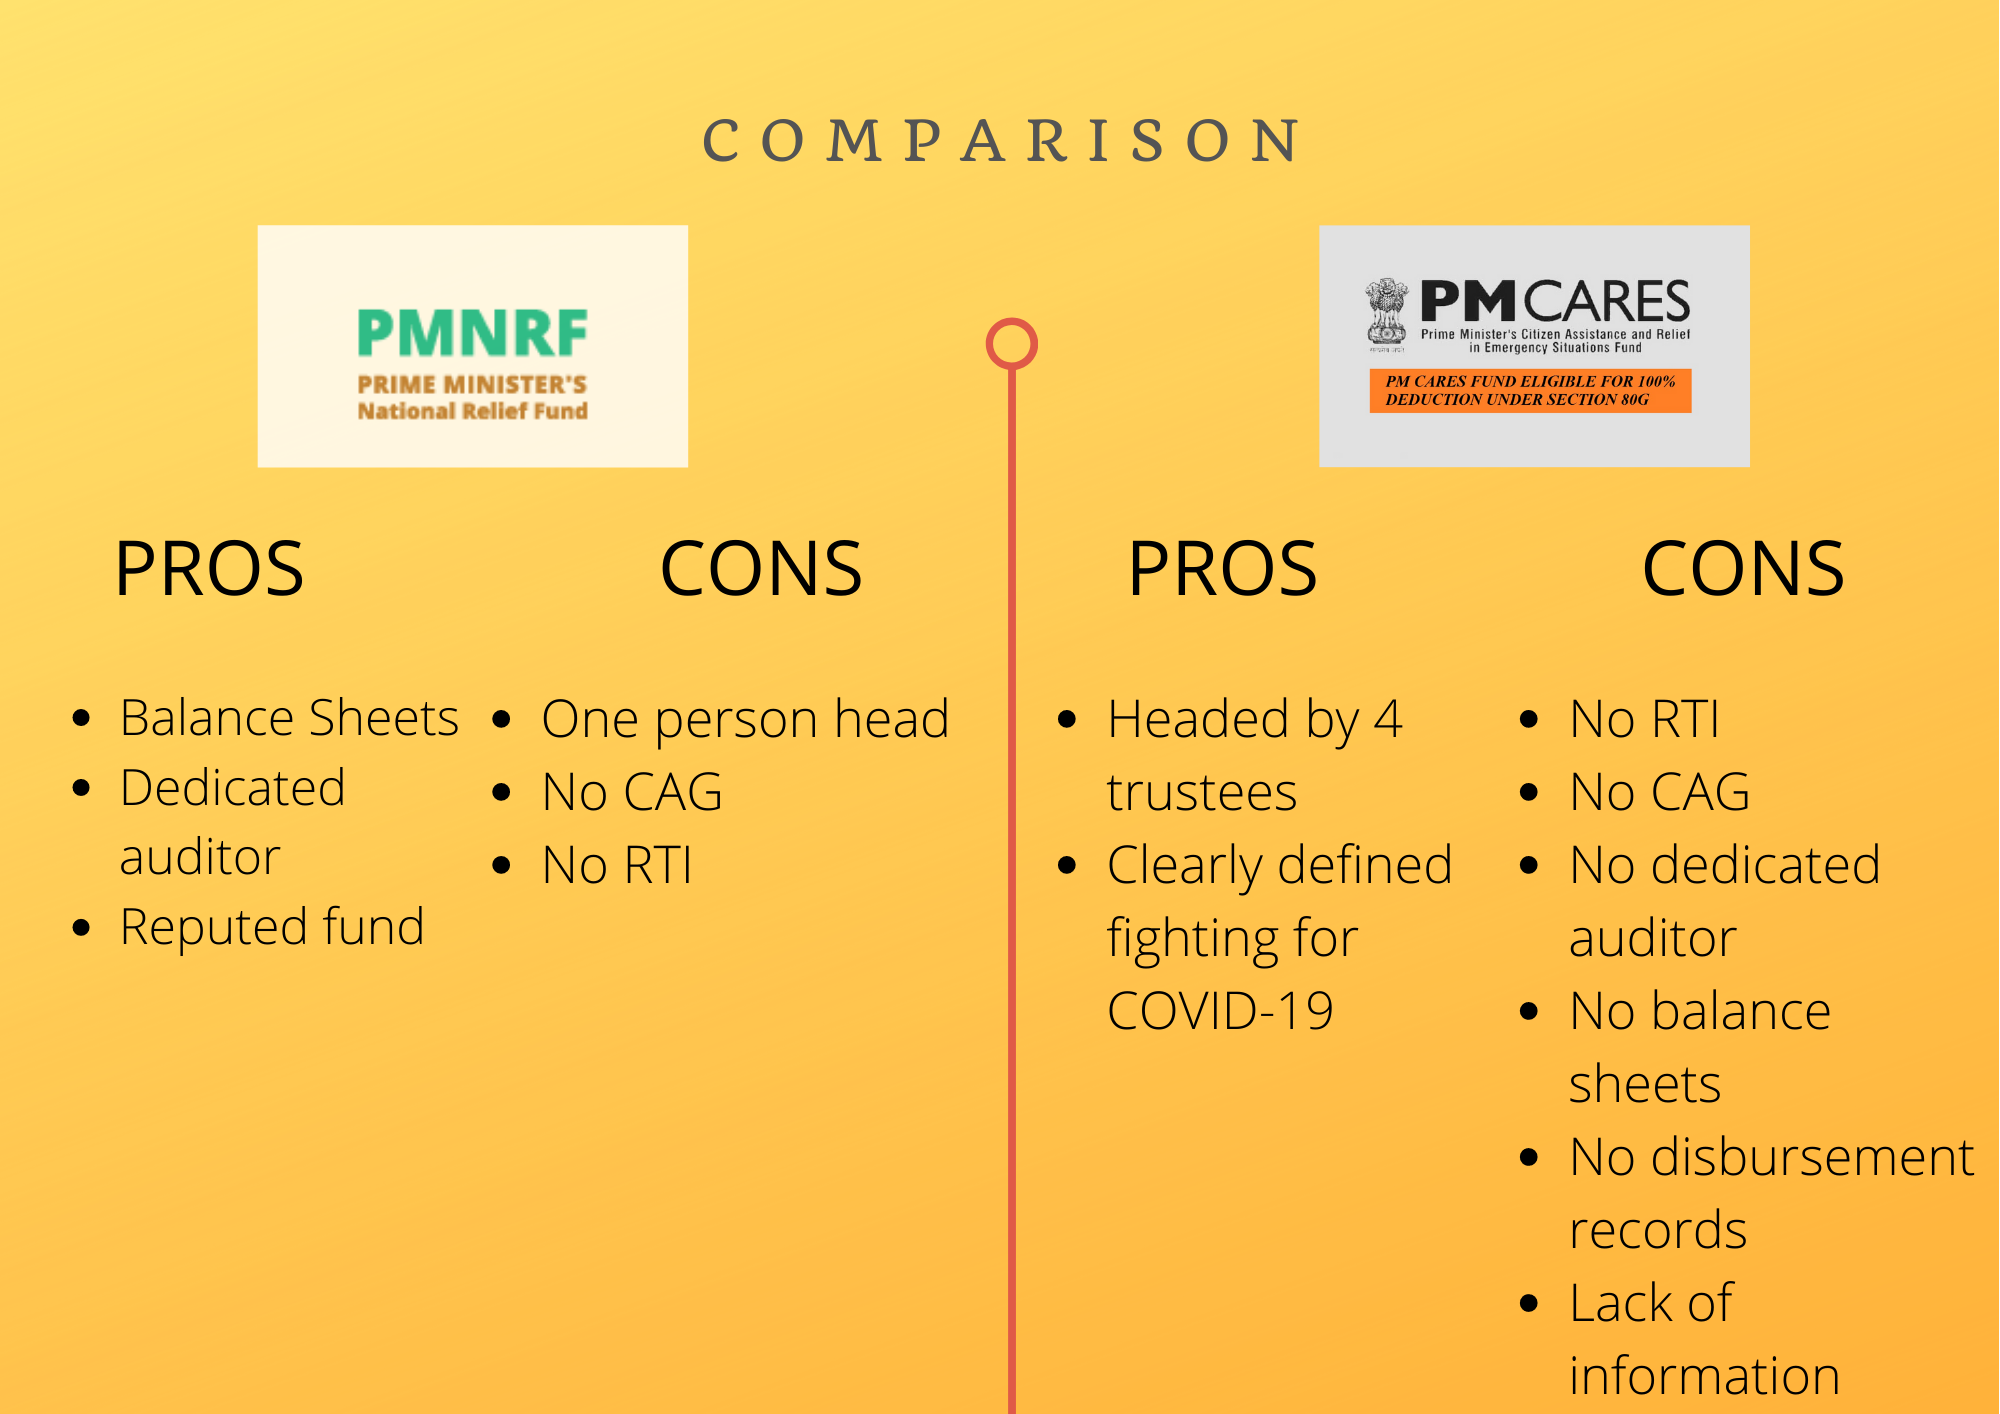 What is the Difference Between PMNRF and PM Cares Fund